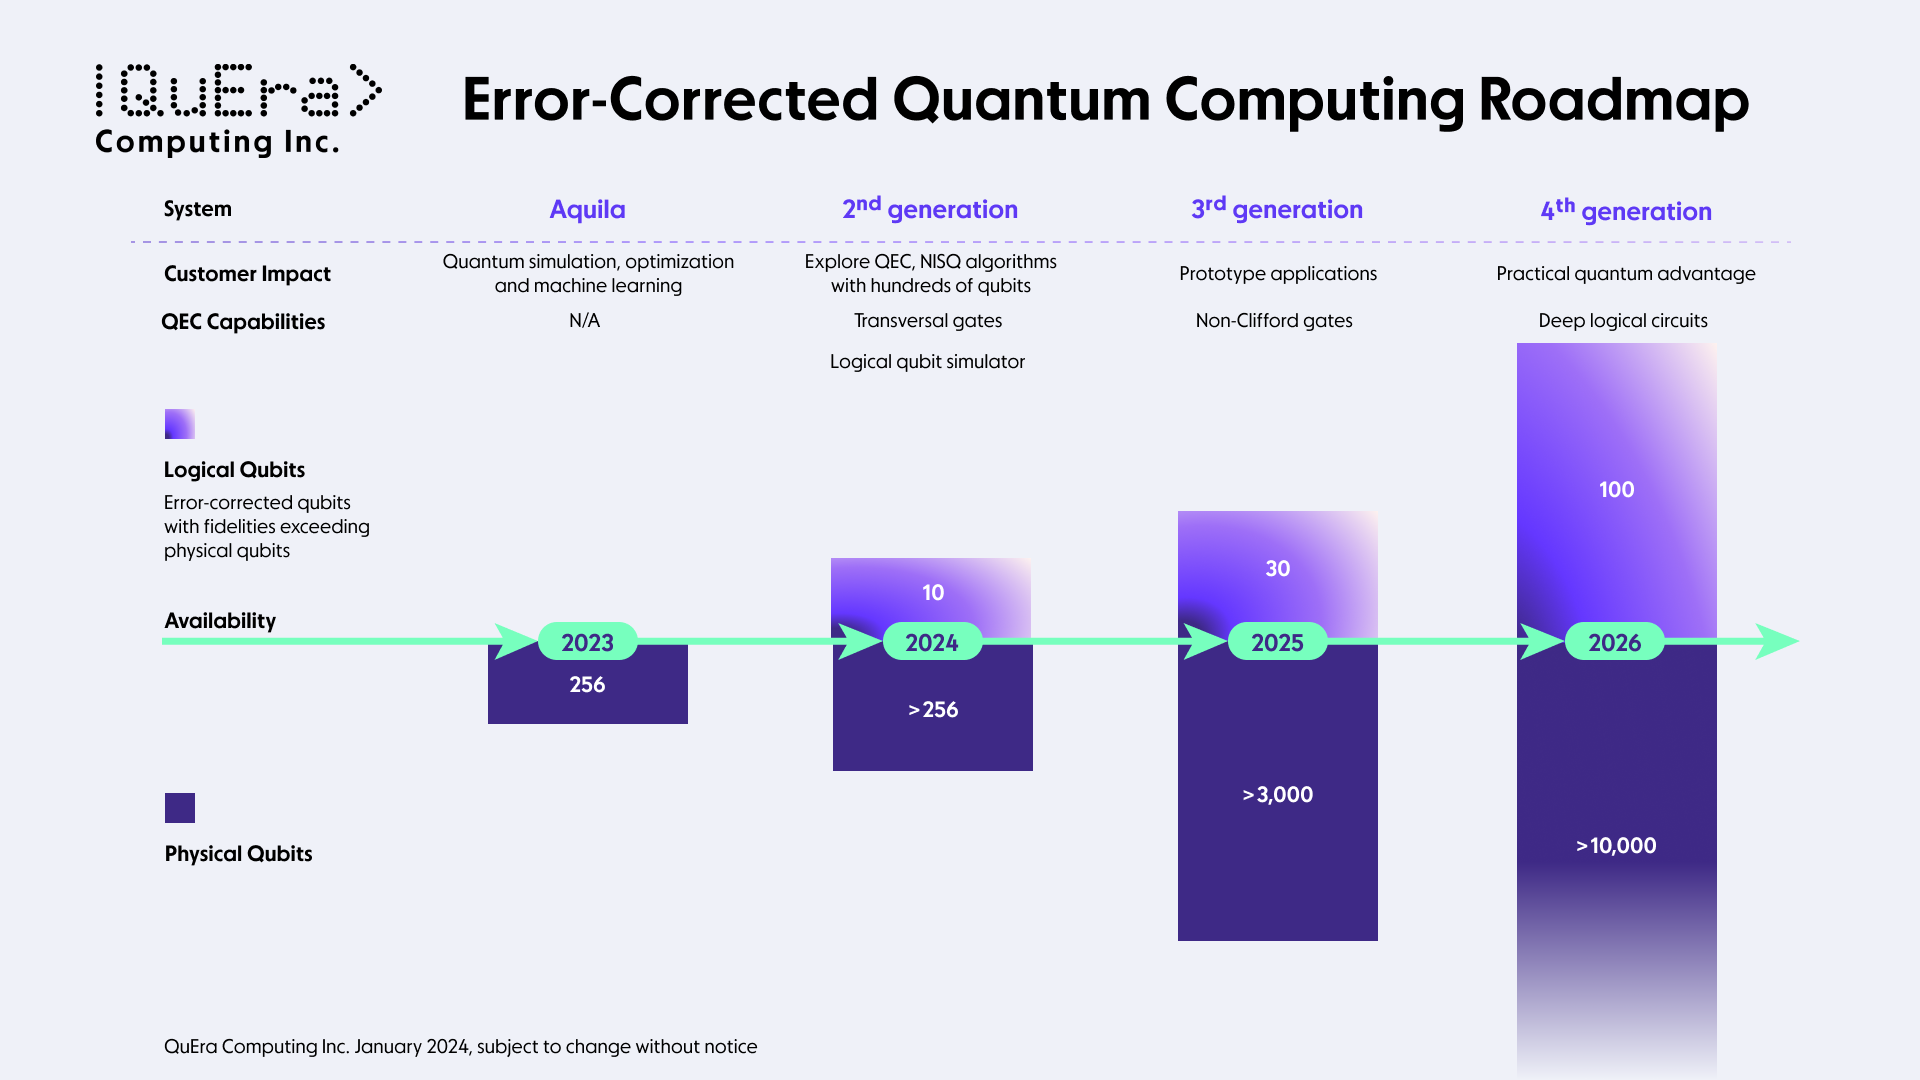 Quera Computing Unveils Roadmap For Advanced Error-Corrected Quantum Computers By 2026 With 100 Logical Qubits